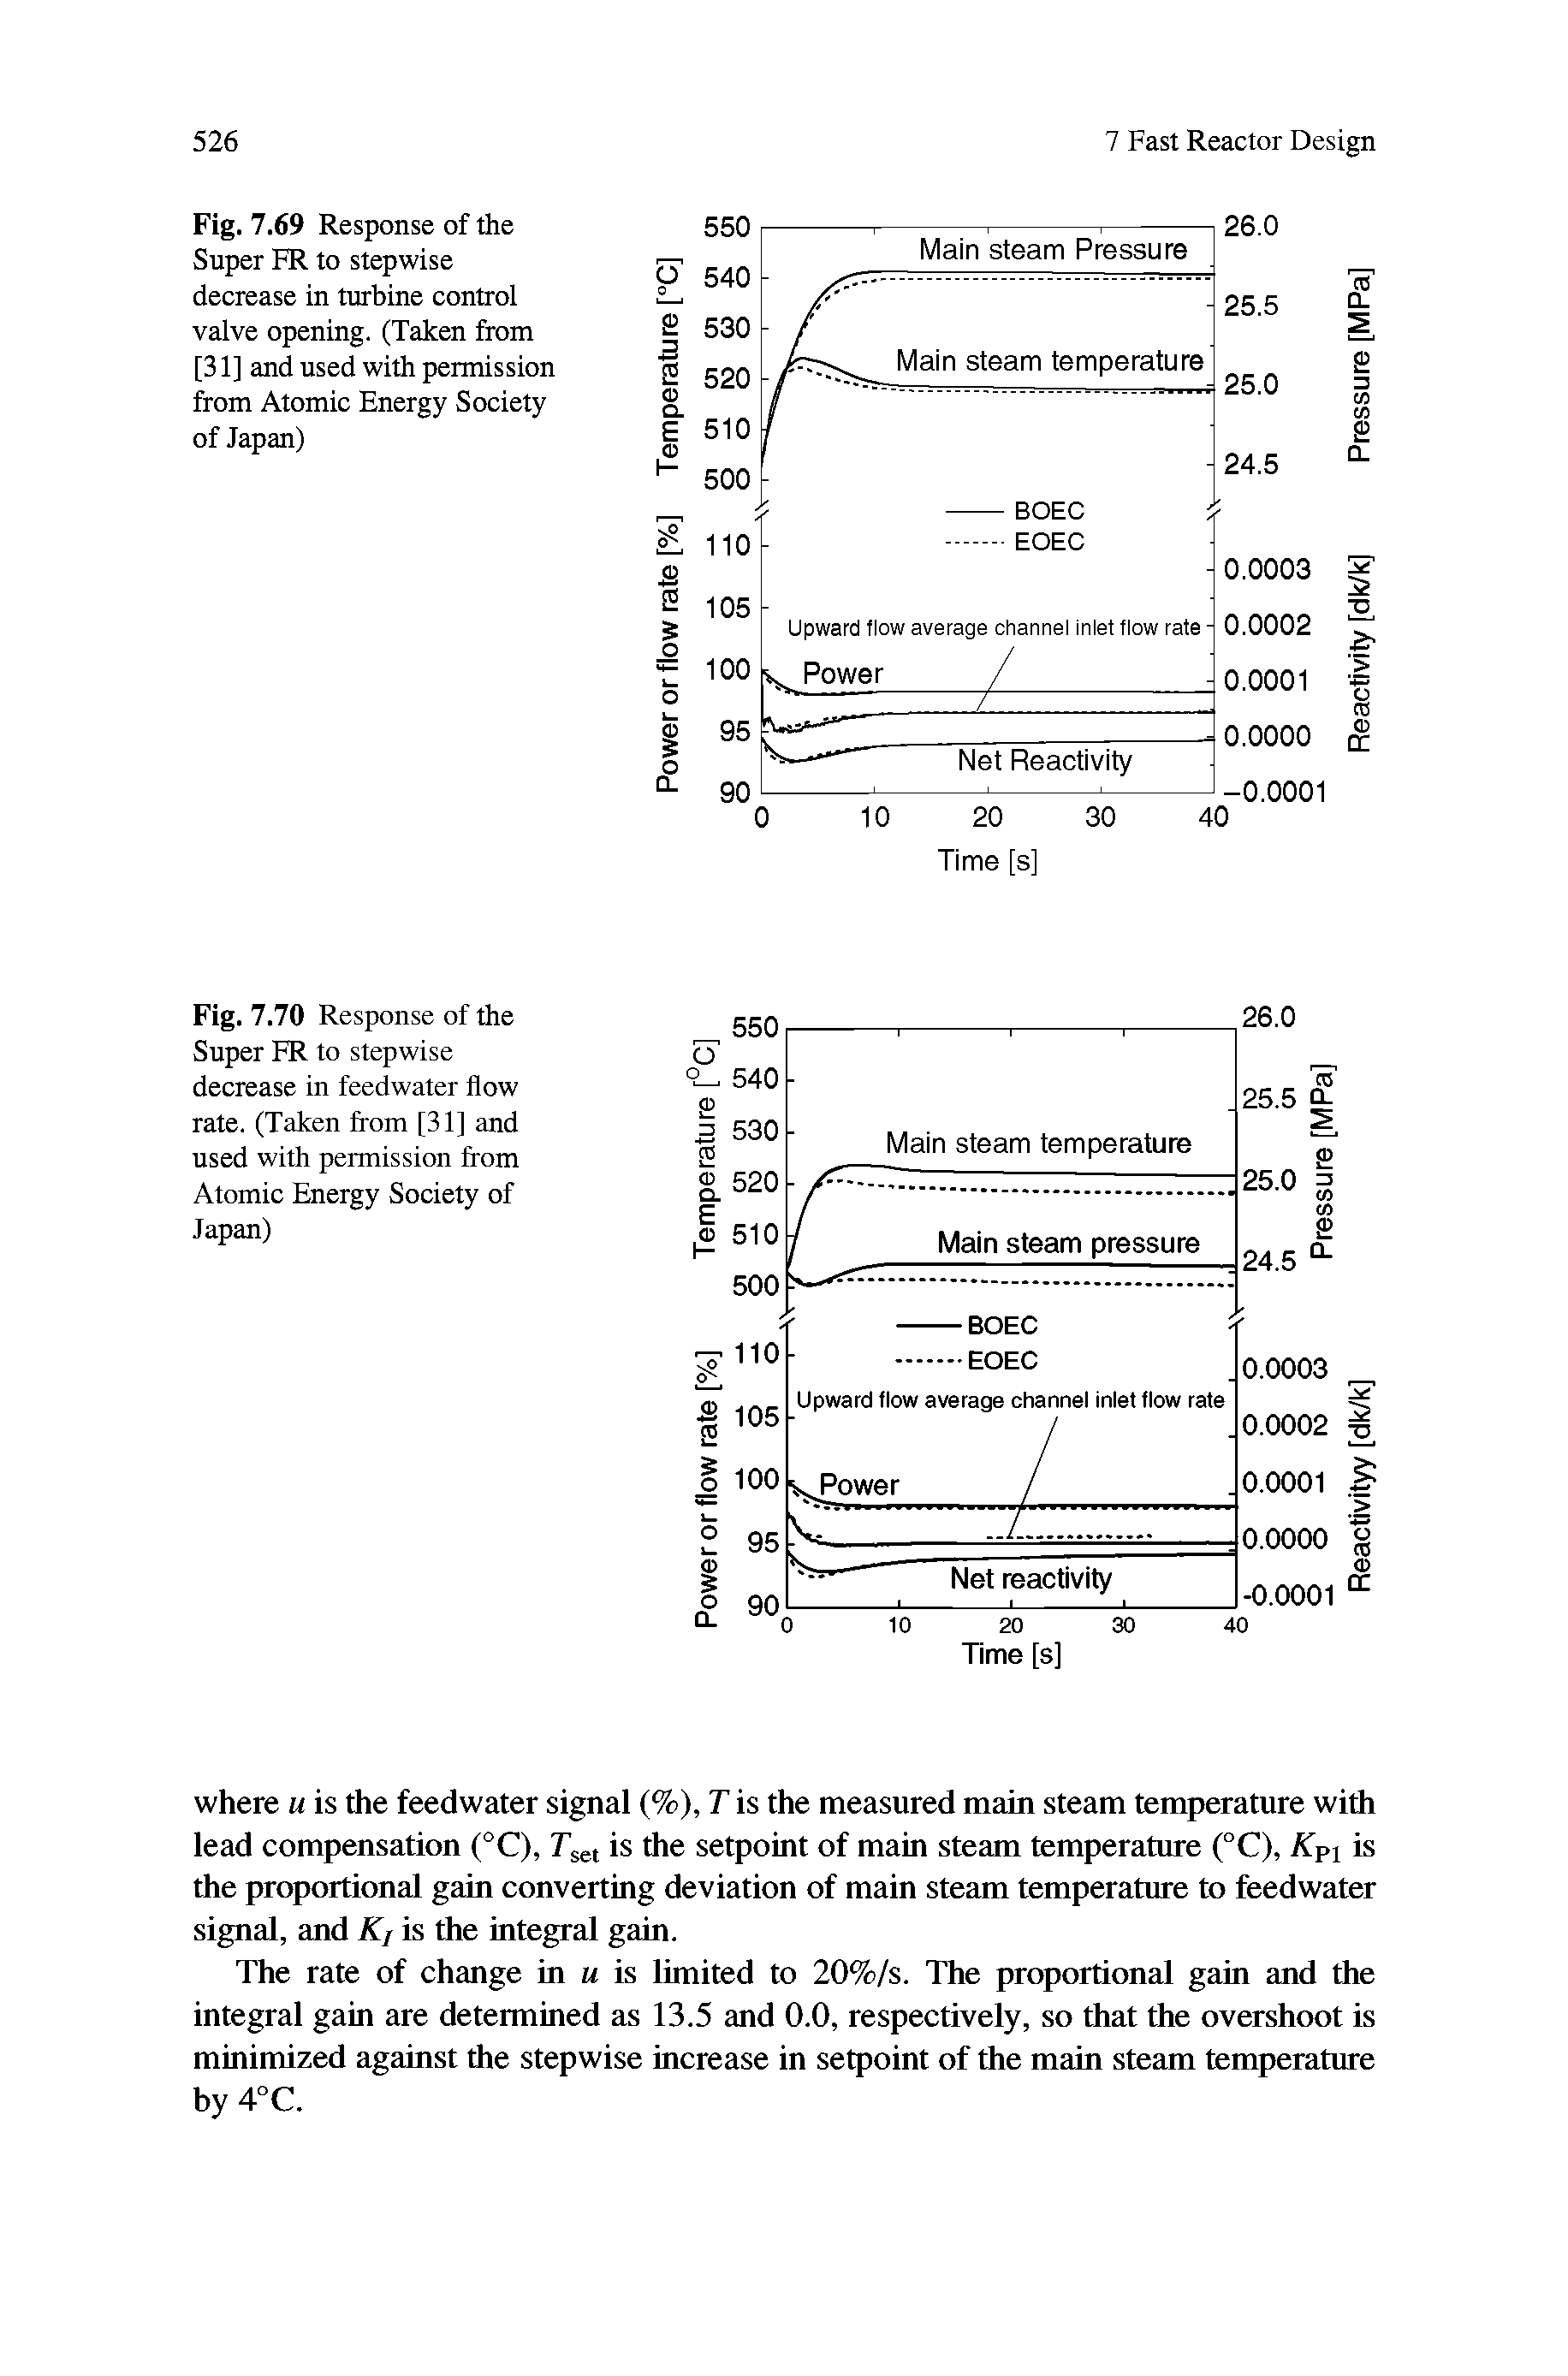 Fig. 7.69 Response of the Super ER to stepwise decrease in turbine control valve opening. (Taken from [31] and used with permission from Atomic Energy Society of Japan)...